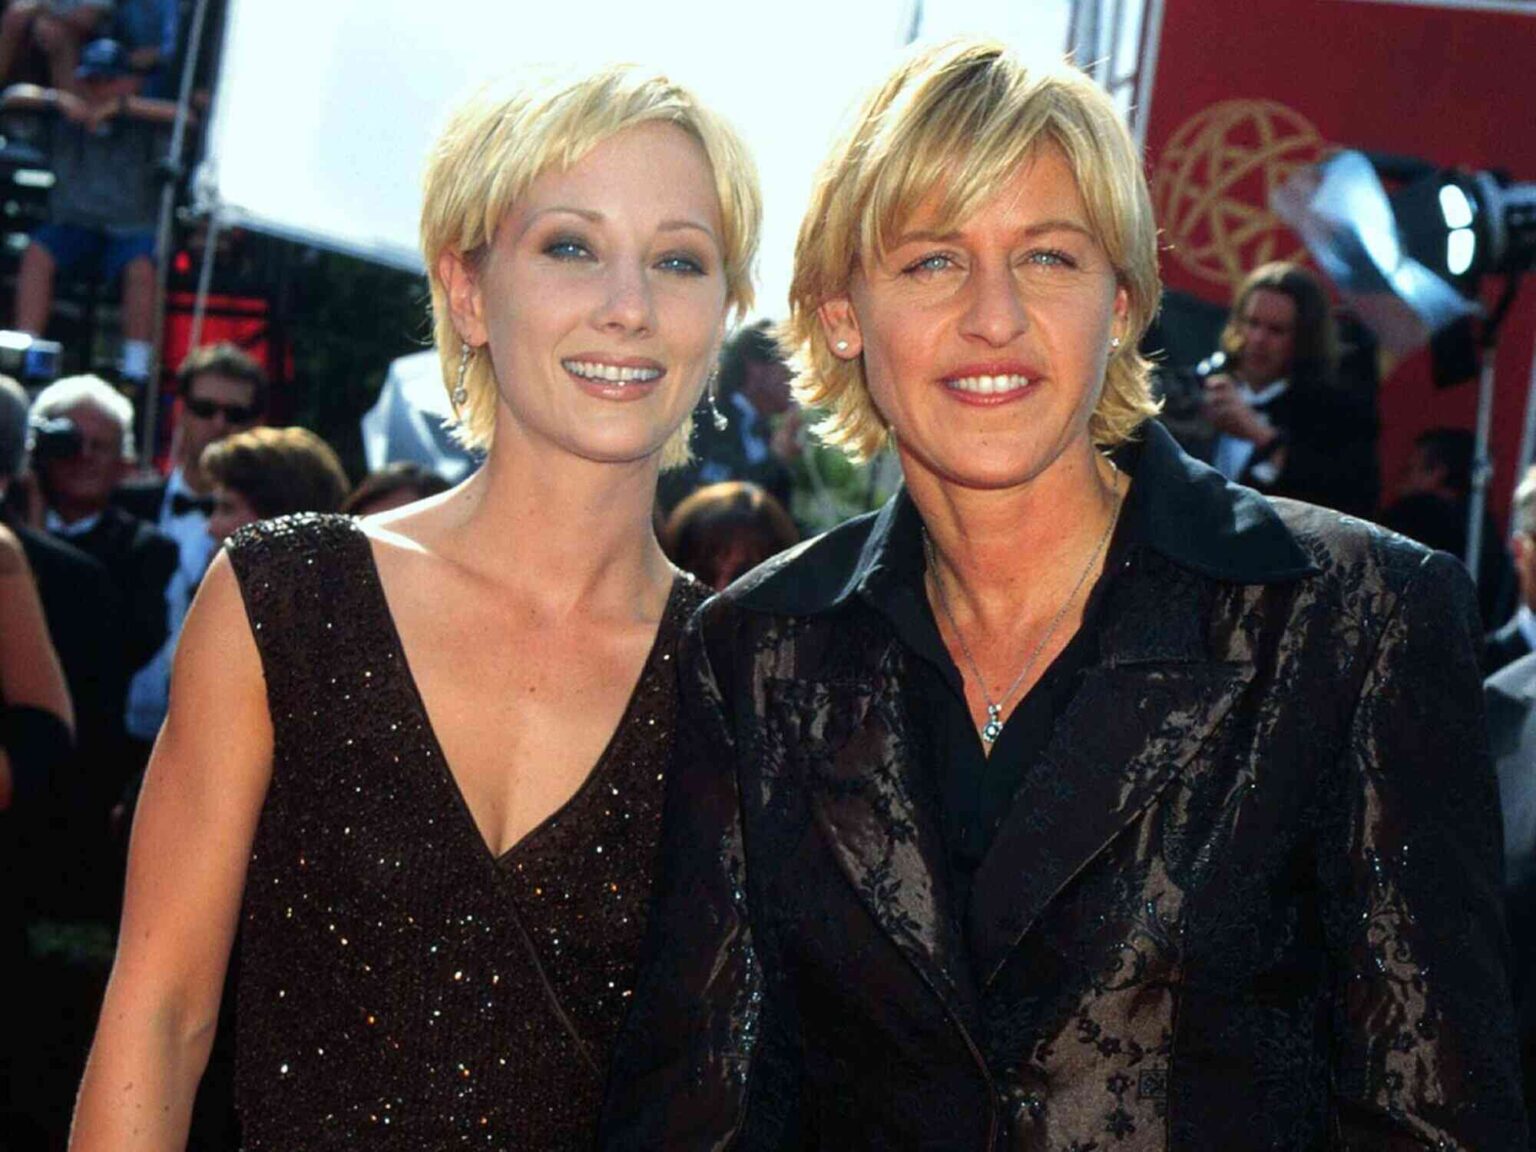 Is Ellen Degeneres getting accused of being mean and toxic again? Find out what ex girlfriend and actress Anne Heche had to say about her here.